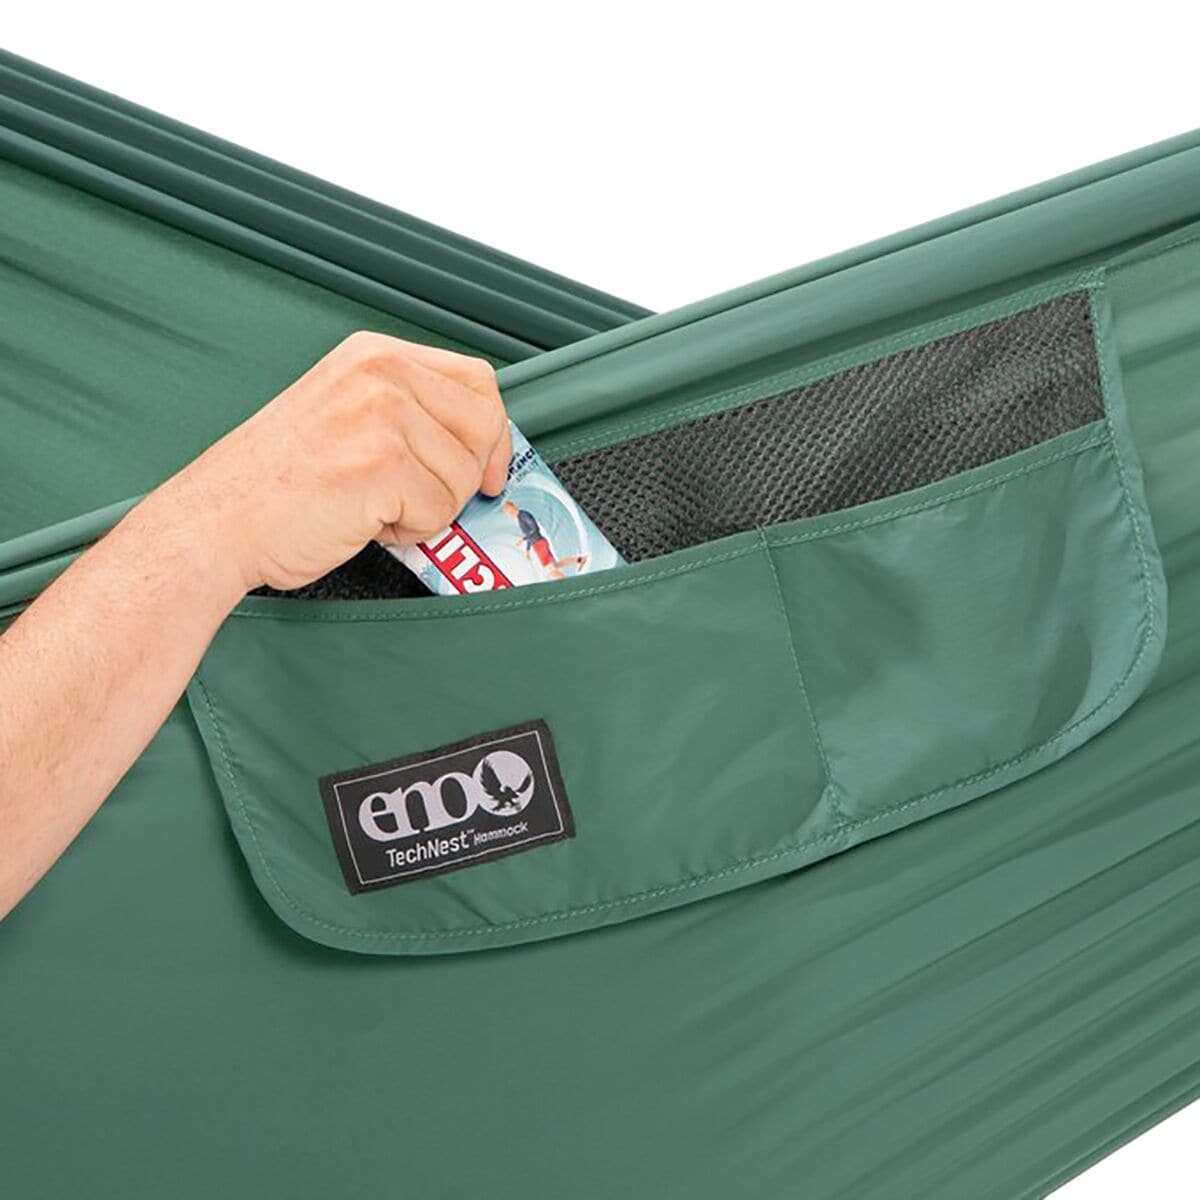  Eagles Nest Outfitters TechNest Hammock - Hike & Camp